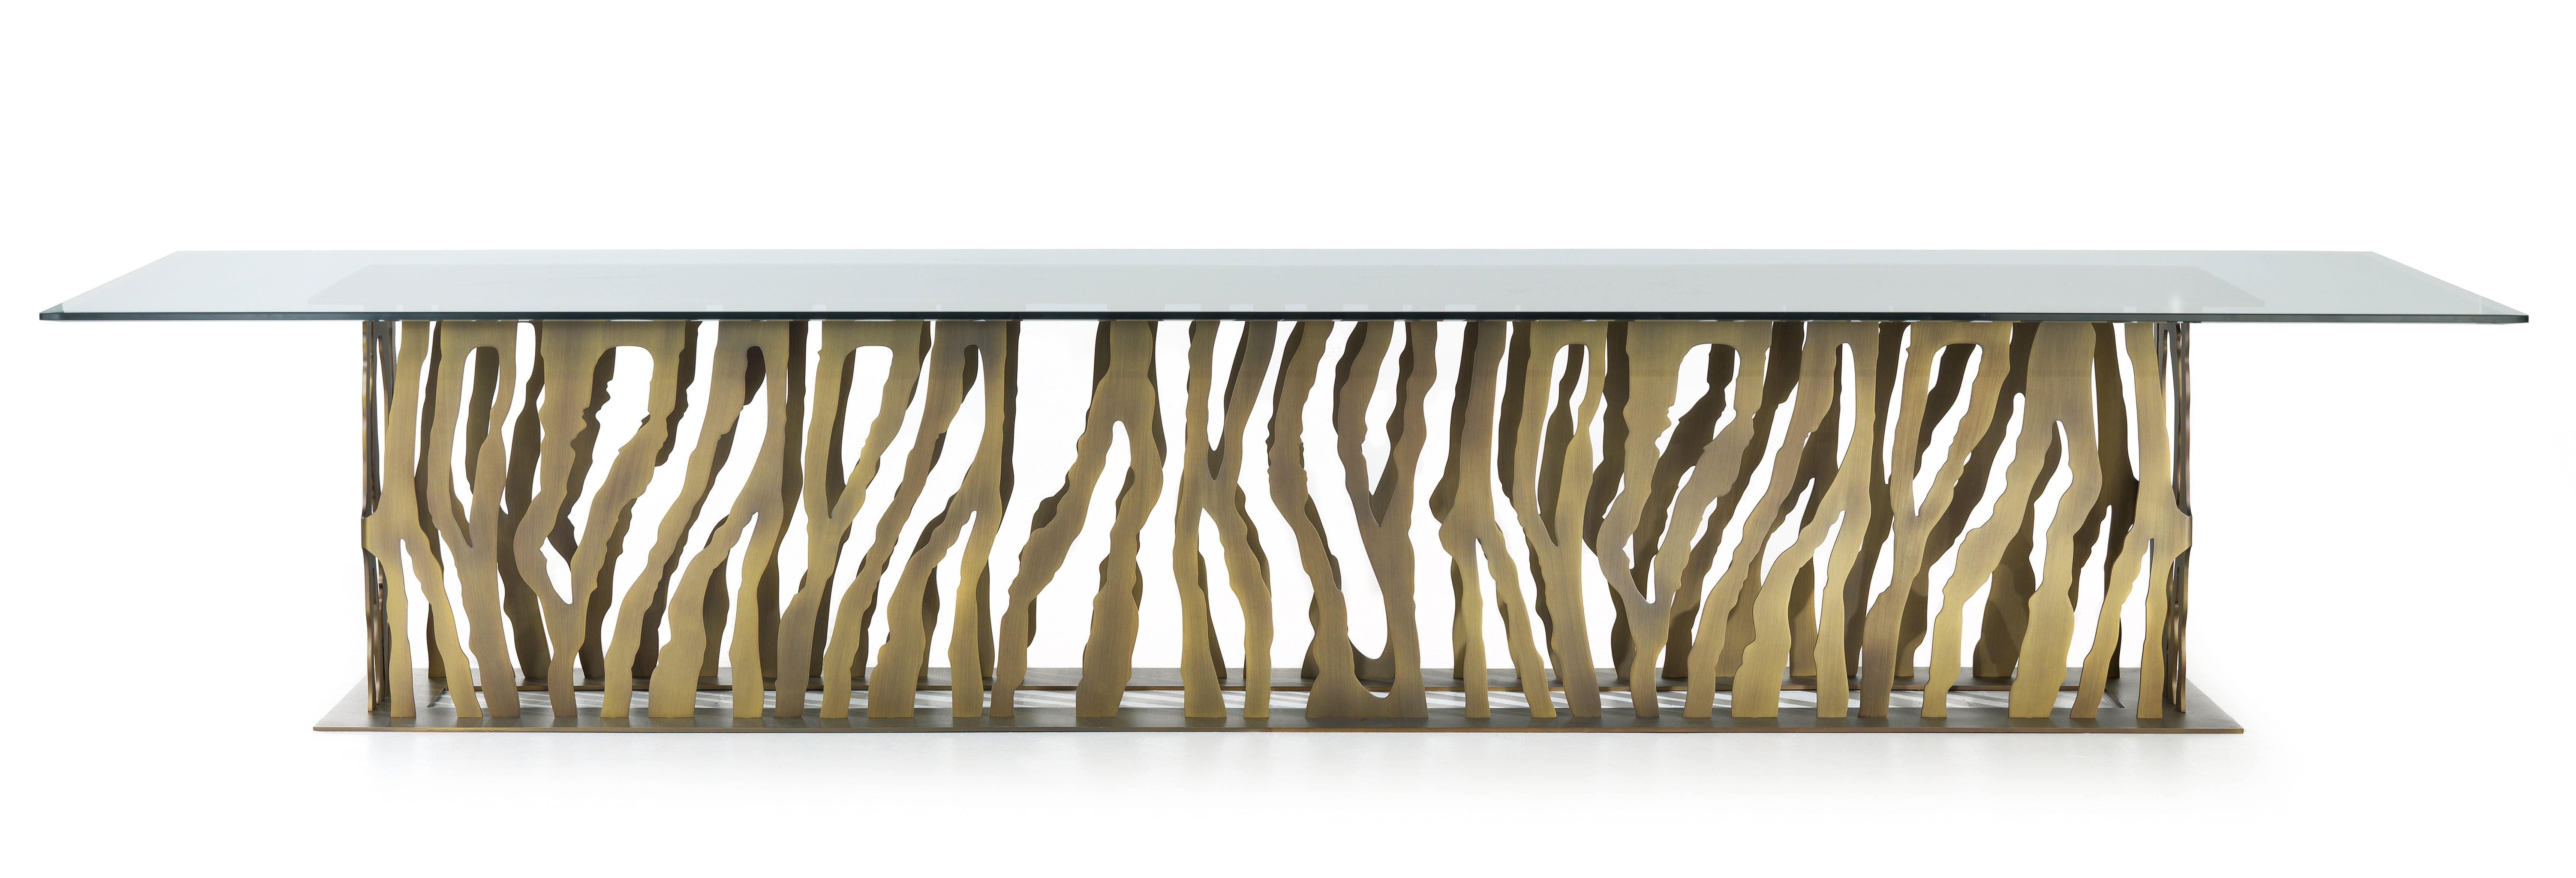 B-52 Dining Table in Metal Base by Roberto Cavalli Home Interiors